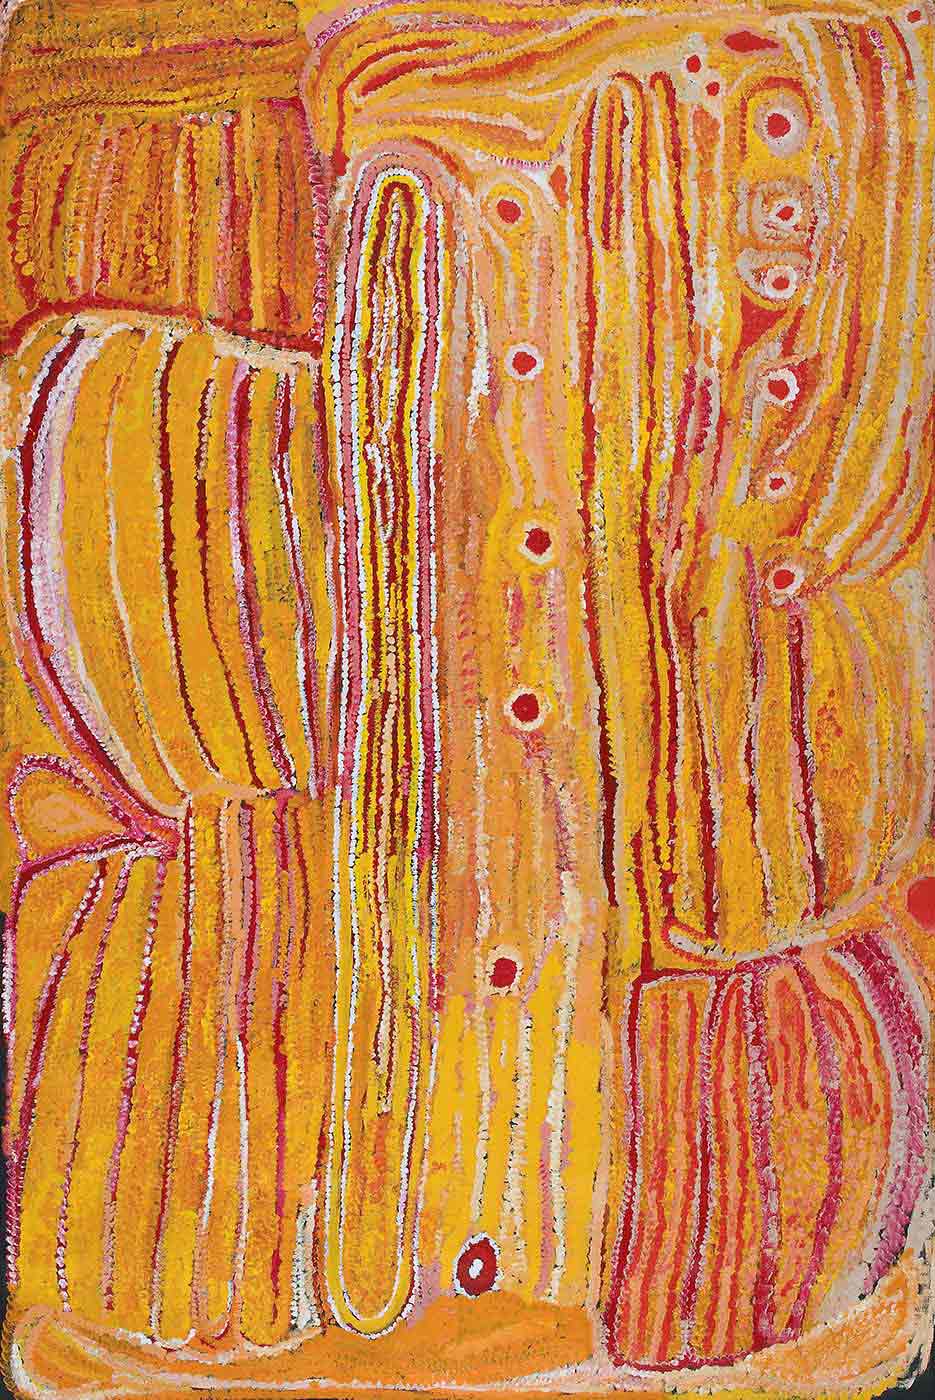 A yellow toned textured painting on brown linen with a vertical line of six small red-pink circles down the centre. Most of the painting has vertical uneven stripes in yellow with pink, dark pink and white thin lines between. The right side has a shorter line of six red circles at the top and a rectangular shape at the bottom corner with pink and orange uneven vertical stripes and a red circle above it. In the middle section next to the line of red circles is a long round ended concentric line with rows of red, yellow, white and pink inside. On the left side there is a vertical line of four joined outlined shapes with uneven stripes in them in yellow with pink, white and orange thinner lines. At the bottom edge is an apricot coloured section. - click to view larger image